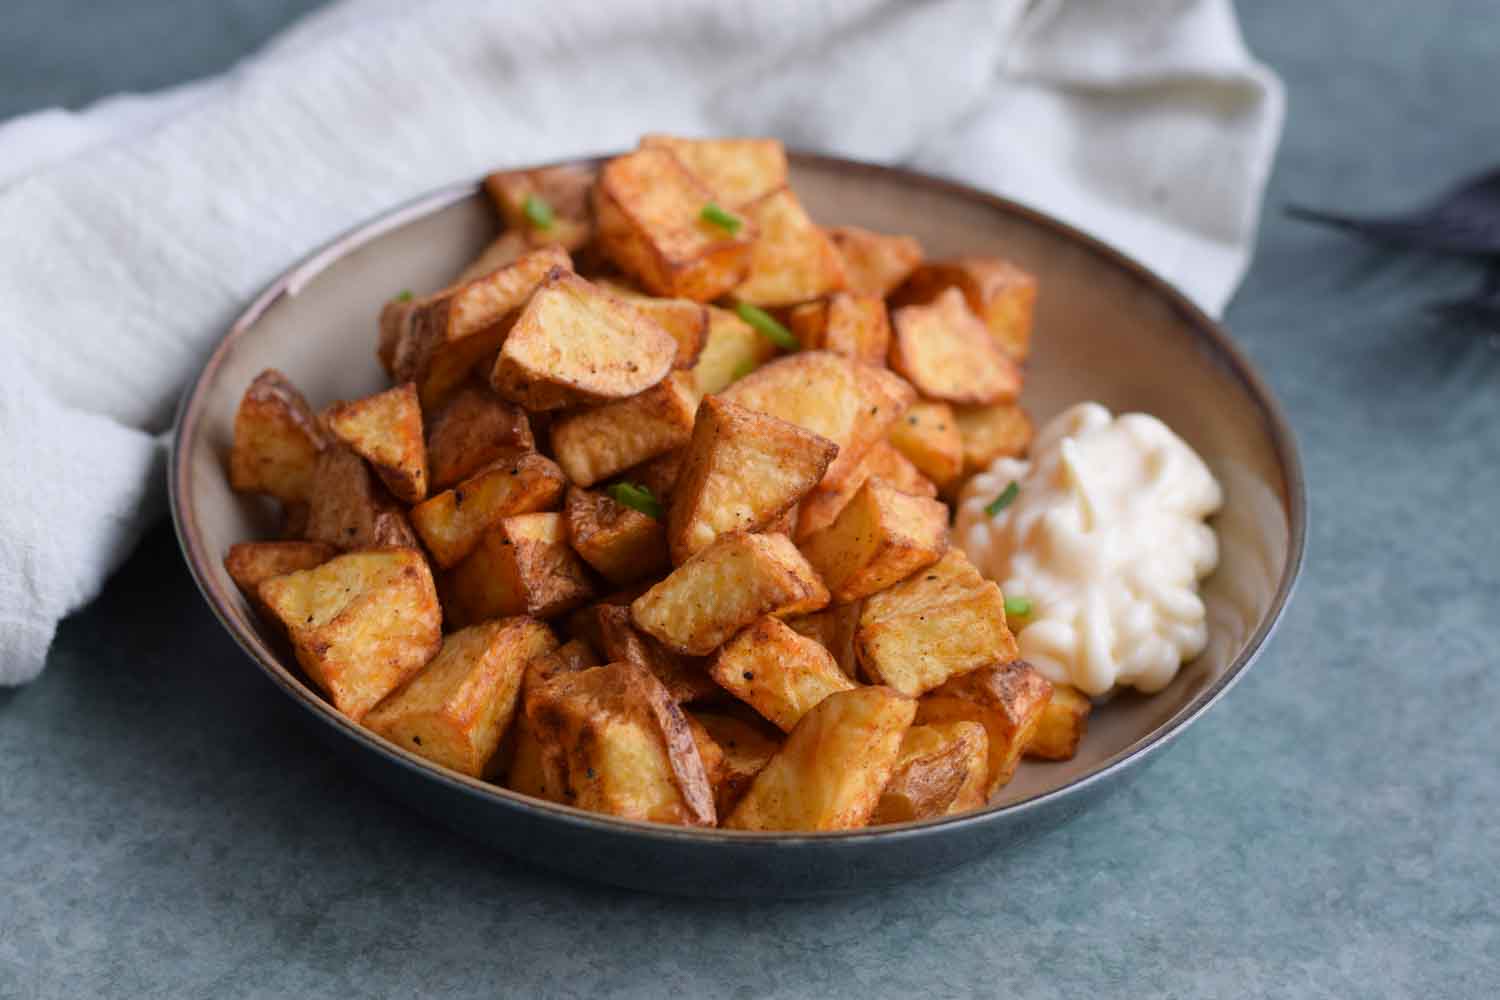 A plate with crispy roasted potatoes from the oven